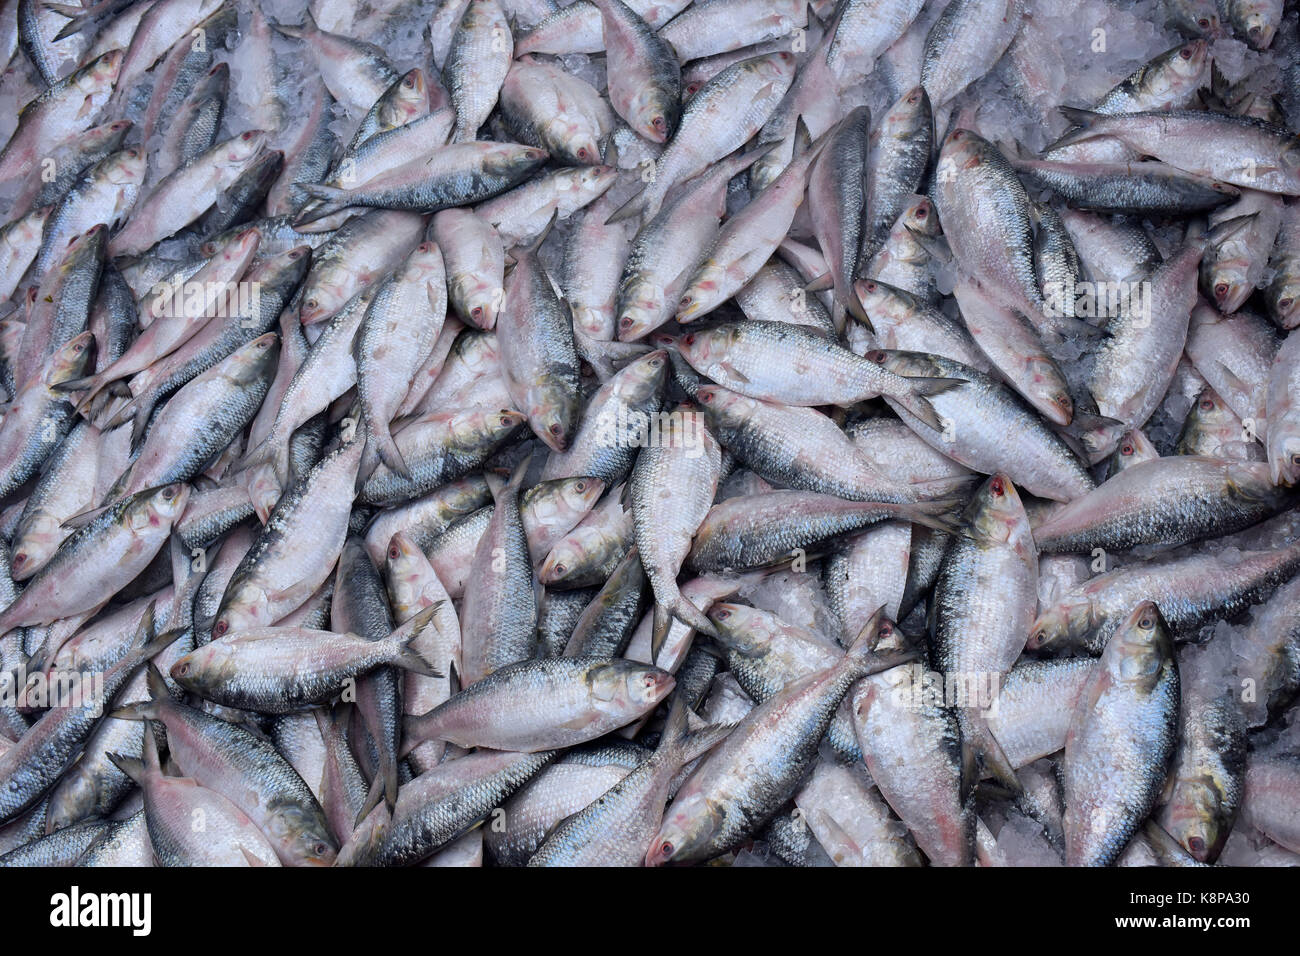 DHAKA, BANGLADESH – SEPTEMBER 20, 2017: A Bangladeshi worker loads Hilsa fish on a truck at Kawran Bazar, in Dhaka, Bangladesh, September 20, 2017. Tenualosa ilisha (ilish, hilsa, hilsa herring, or hilsa shad) is a species of fish in the herring family, and a popular food fish in South Asia. The fish contributes about 12% of the total fish production and about 1% of GDP in Bangladesh. About 450,000 people are directly involved with the catching for livelihood; around four to five million people are indirectly involved with the trade. Stock Photo